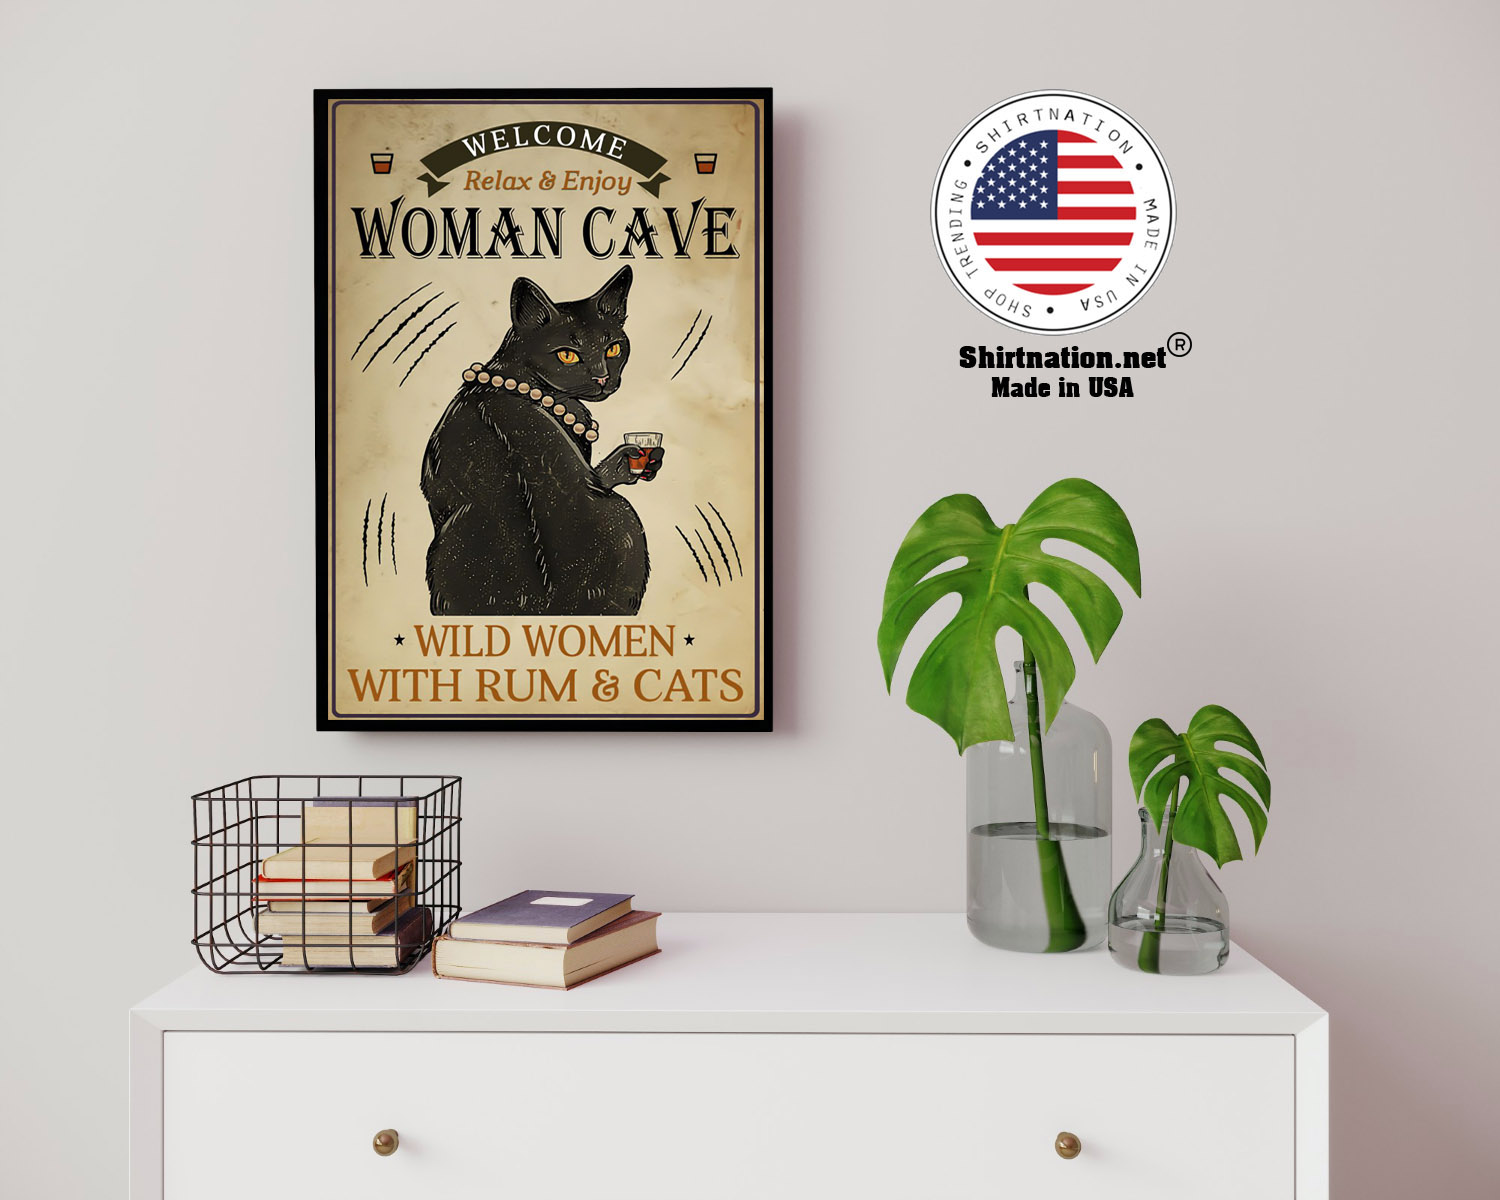 Welcome relax enjoy woman cave will women with rum and cats poster 14